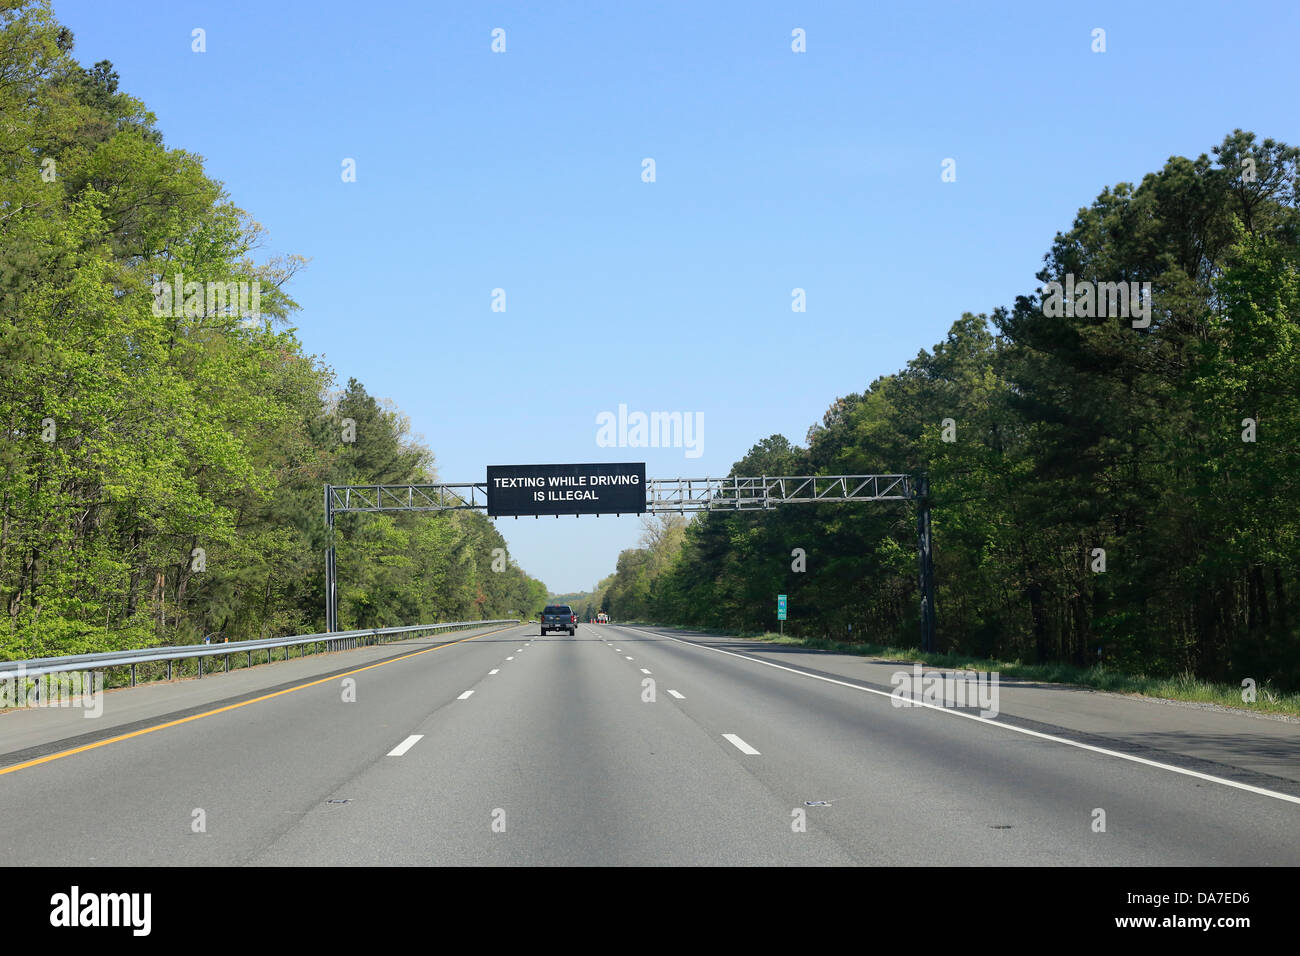 A large highway or road sign message on a US interstate in USA that says Texting while driving is illegal Stock Photo